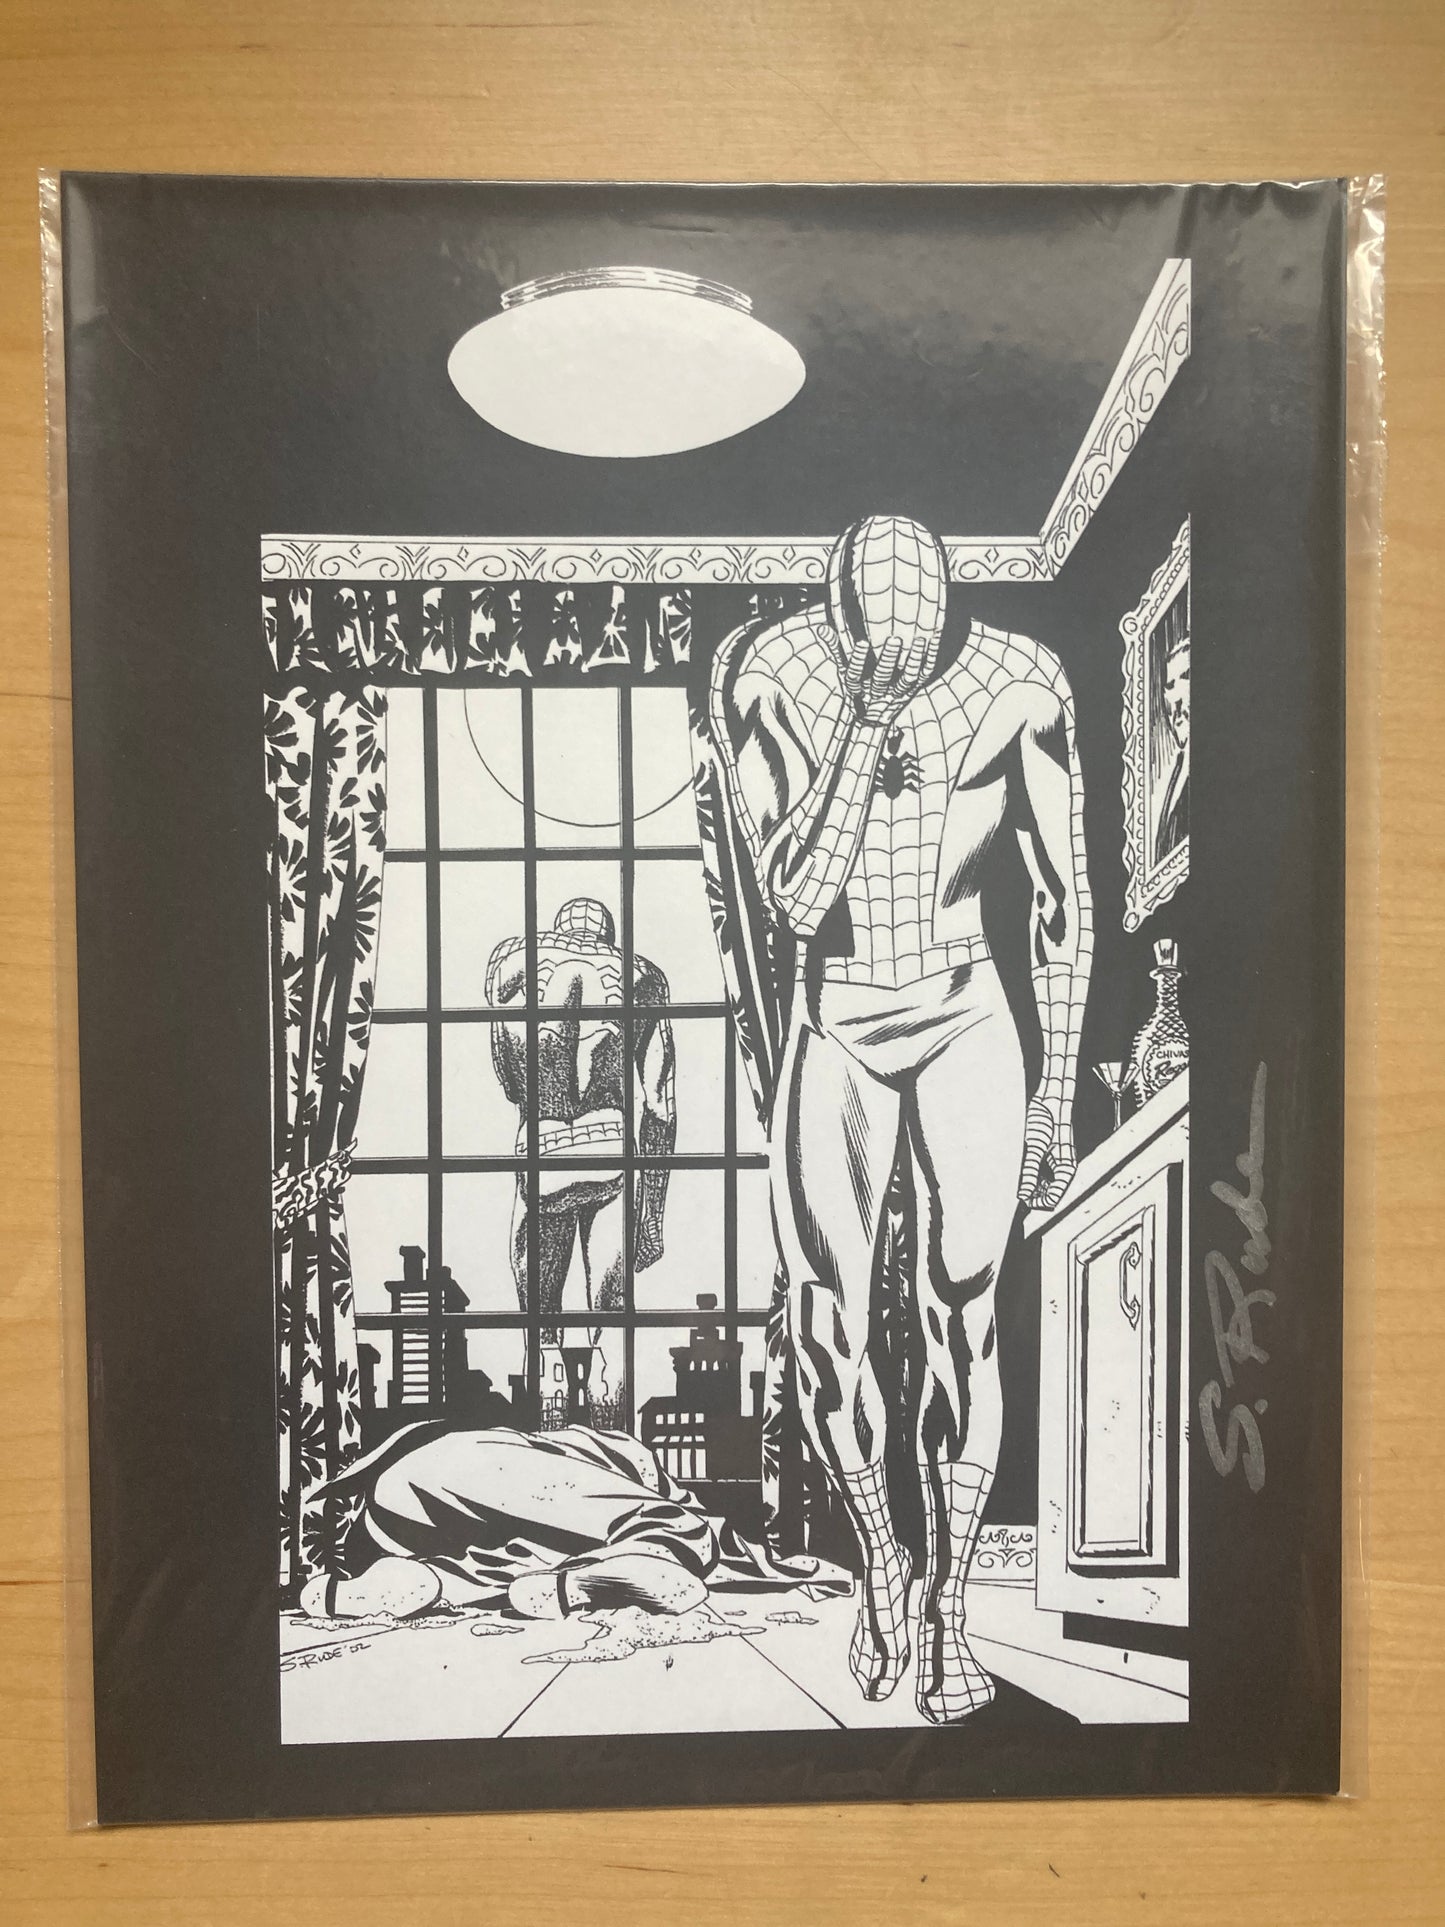 Spider-Man Death without Warning Cover Reproduction B&W Print